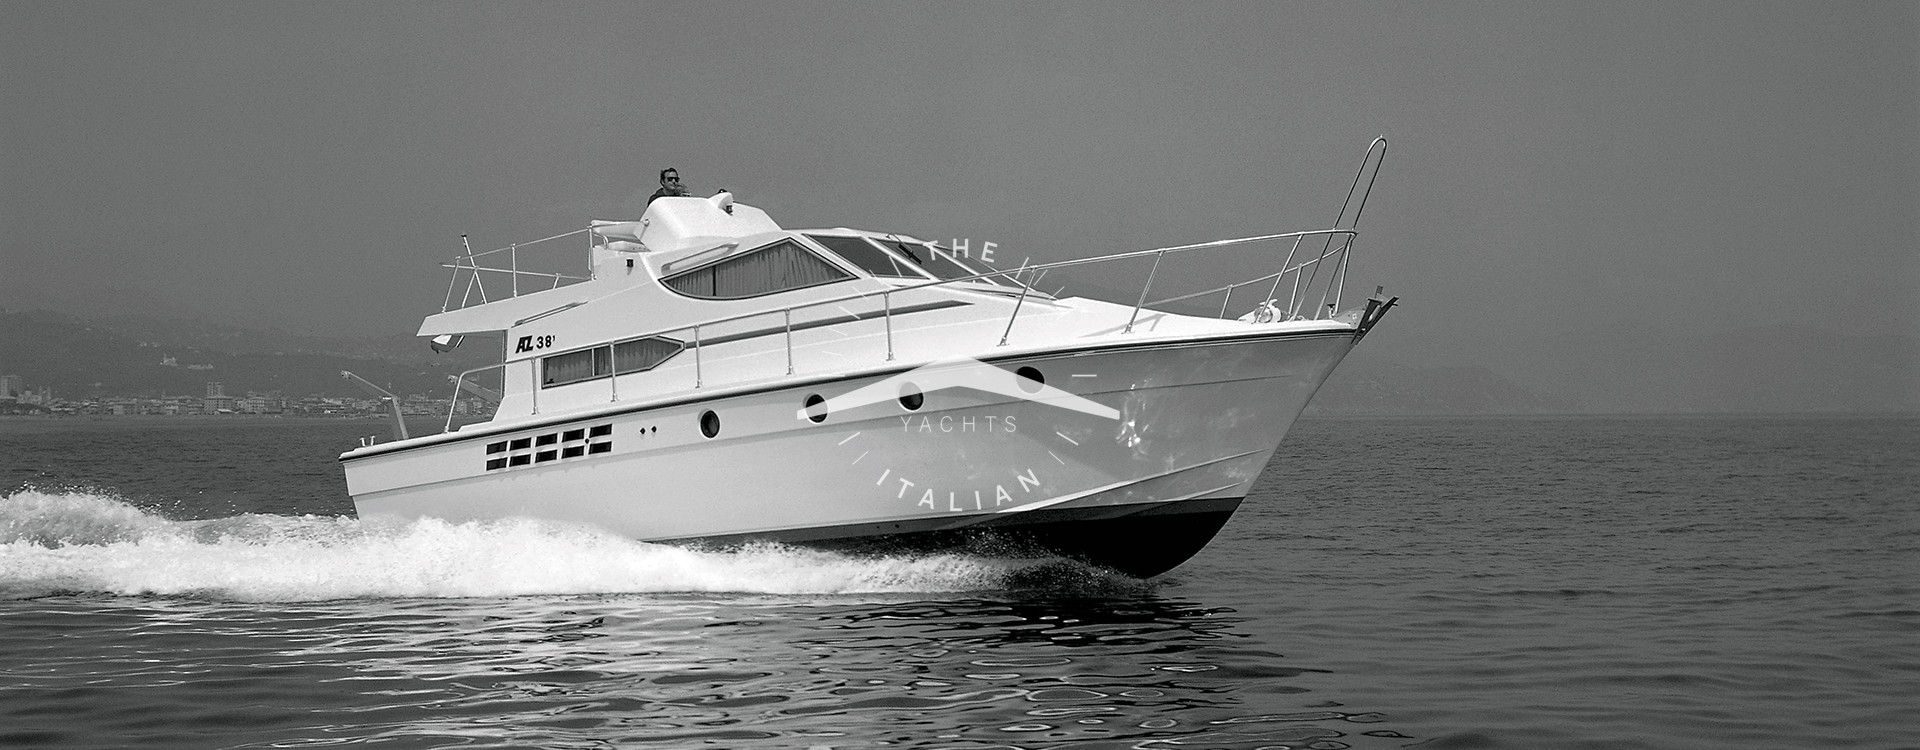 electron model yachts for sale